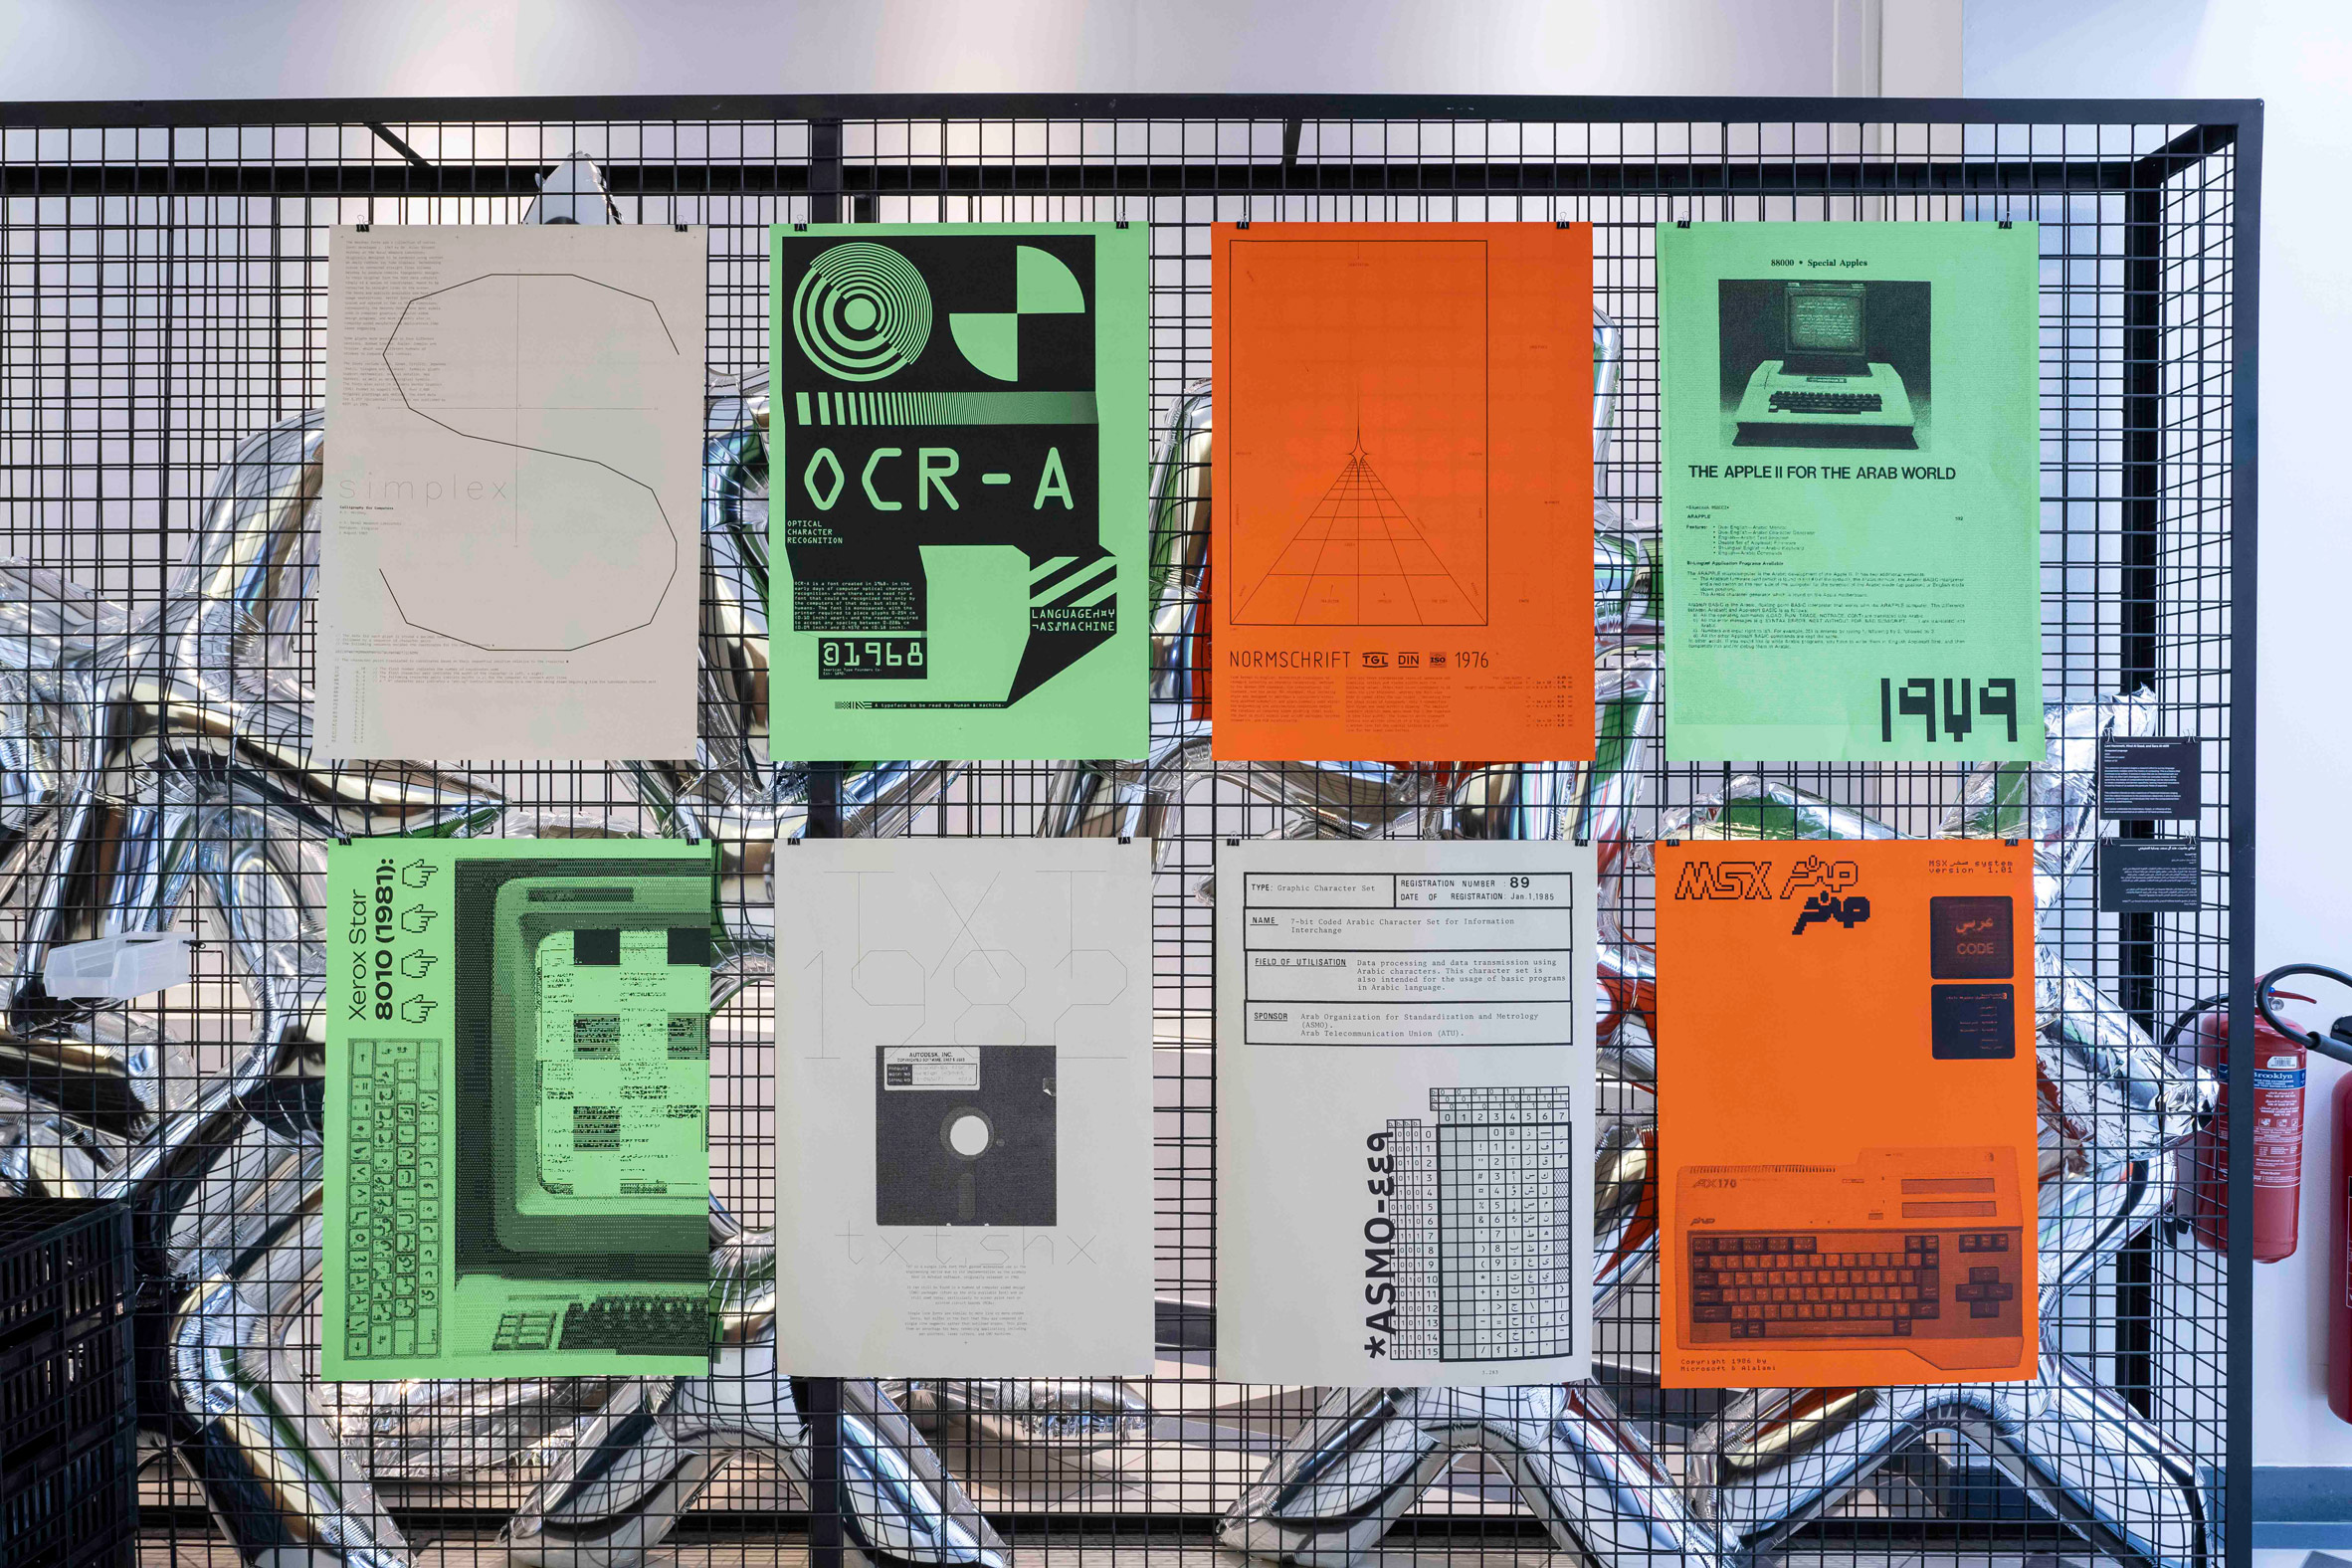 Photograph showing eight posters attached to a gridded screen